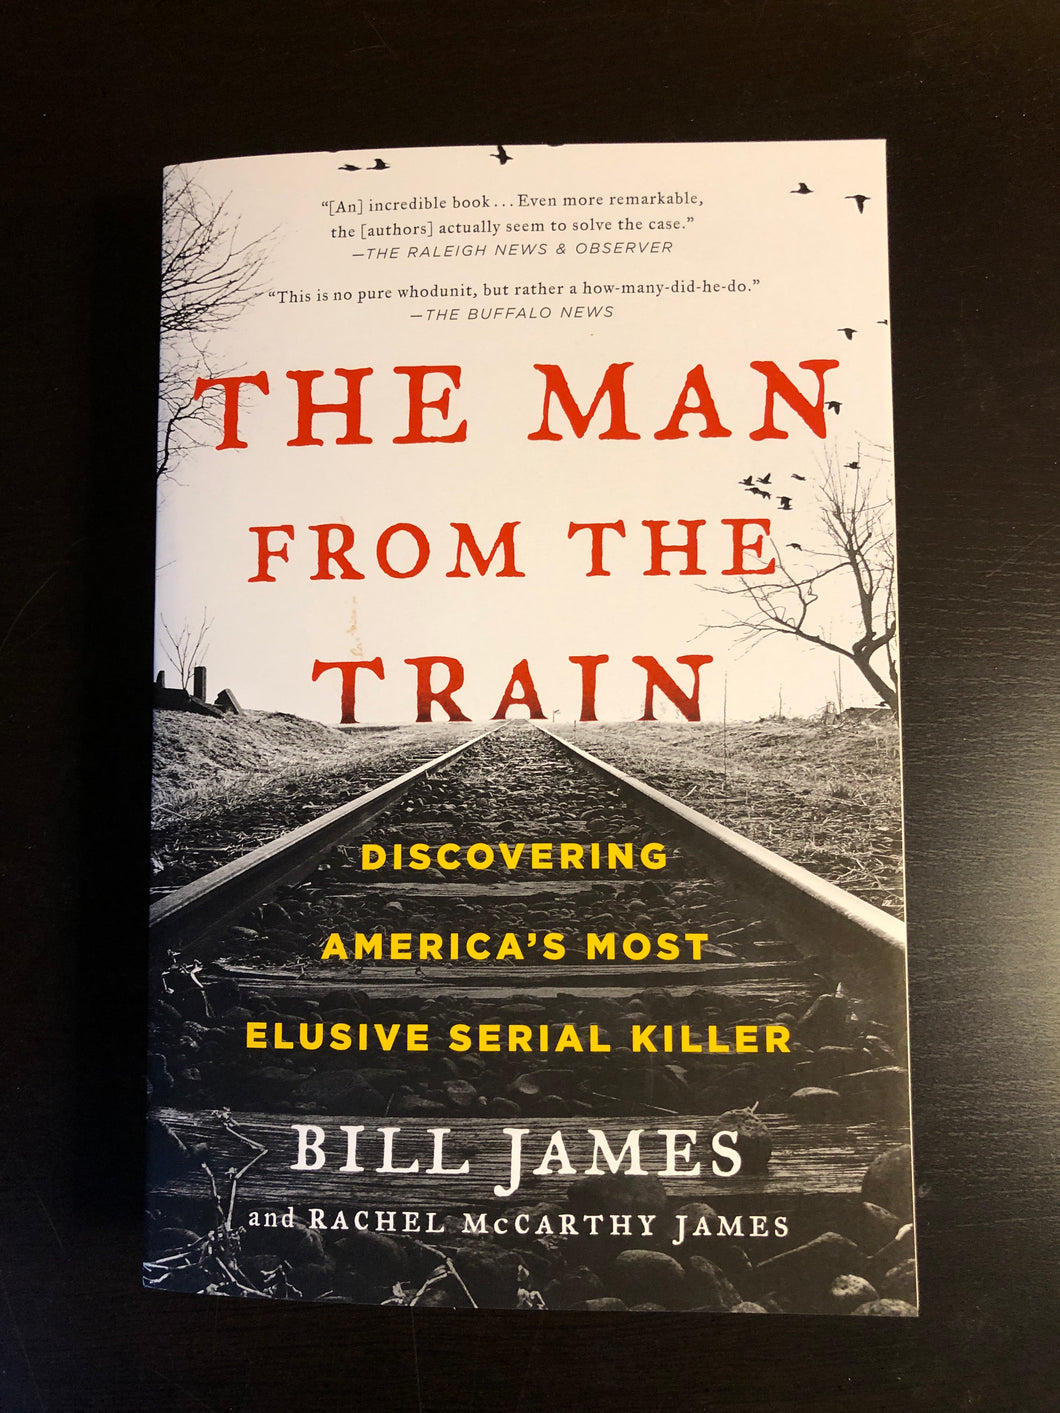 The Man From The Train: Discovering America's Most Elusive Serial Killer